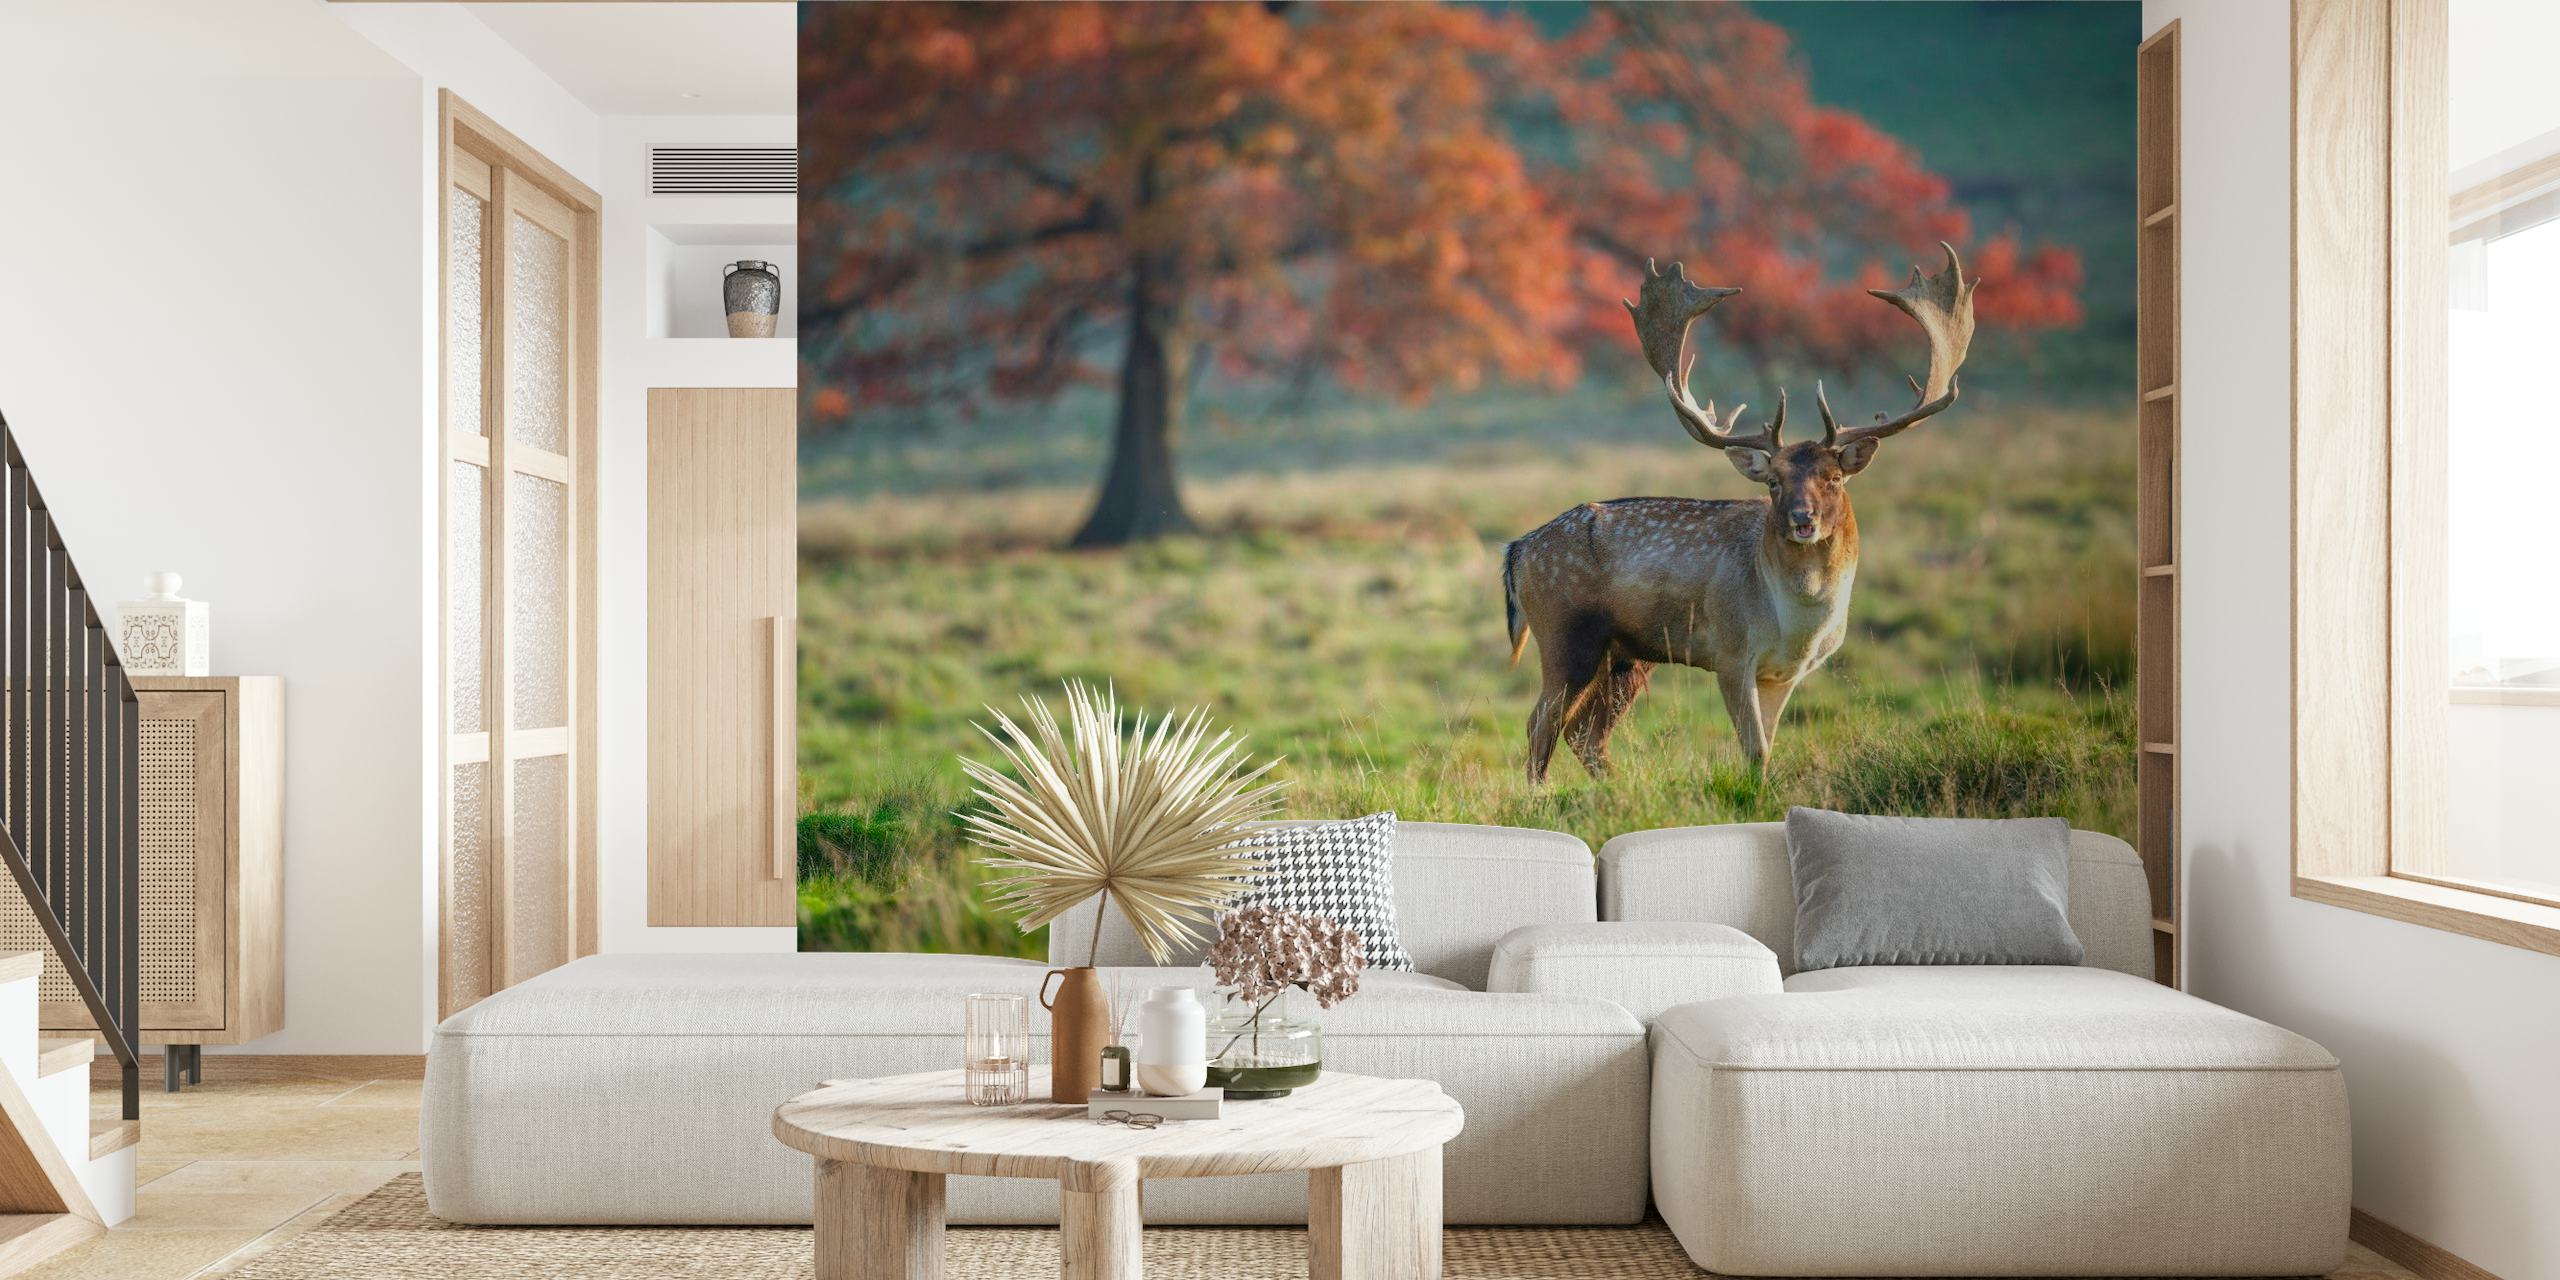 Wall mural of a majestic stag standing in a colorful autumn field with trees in the background